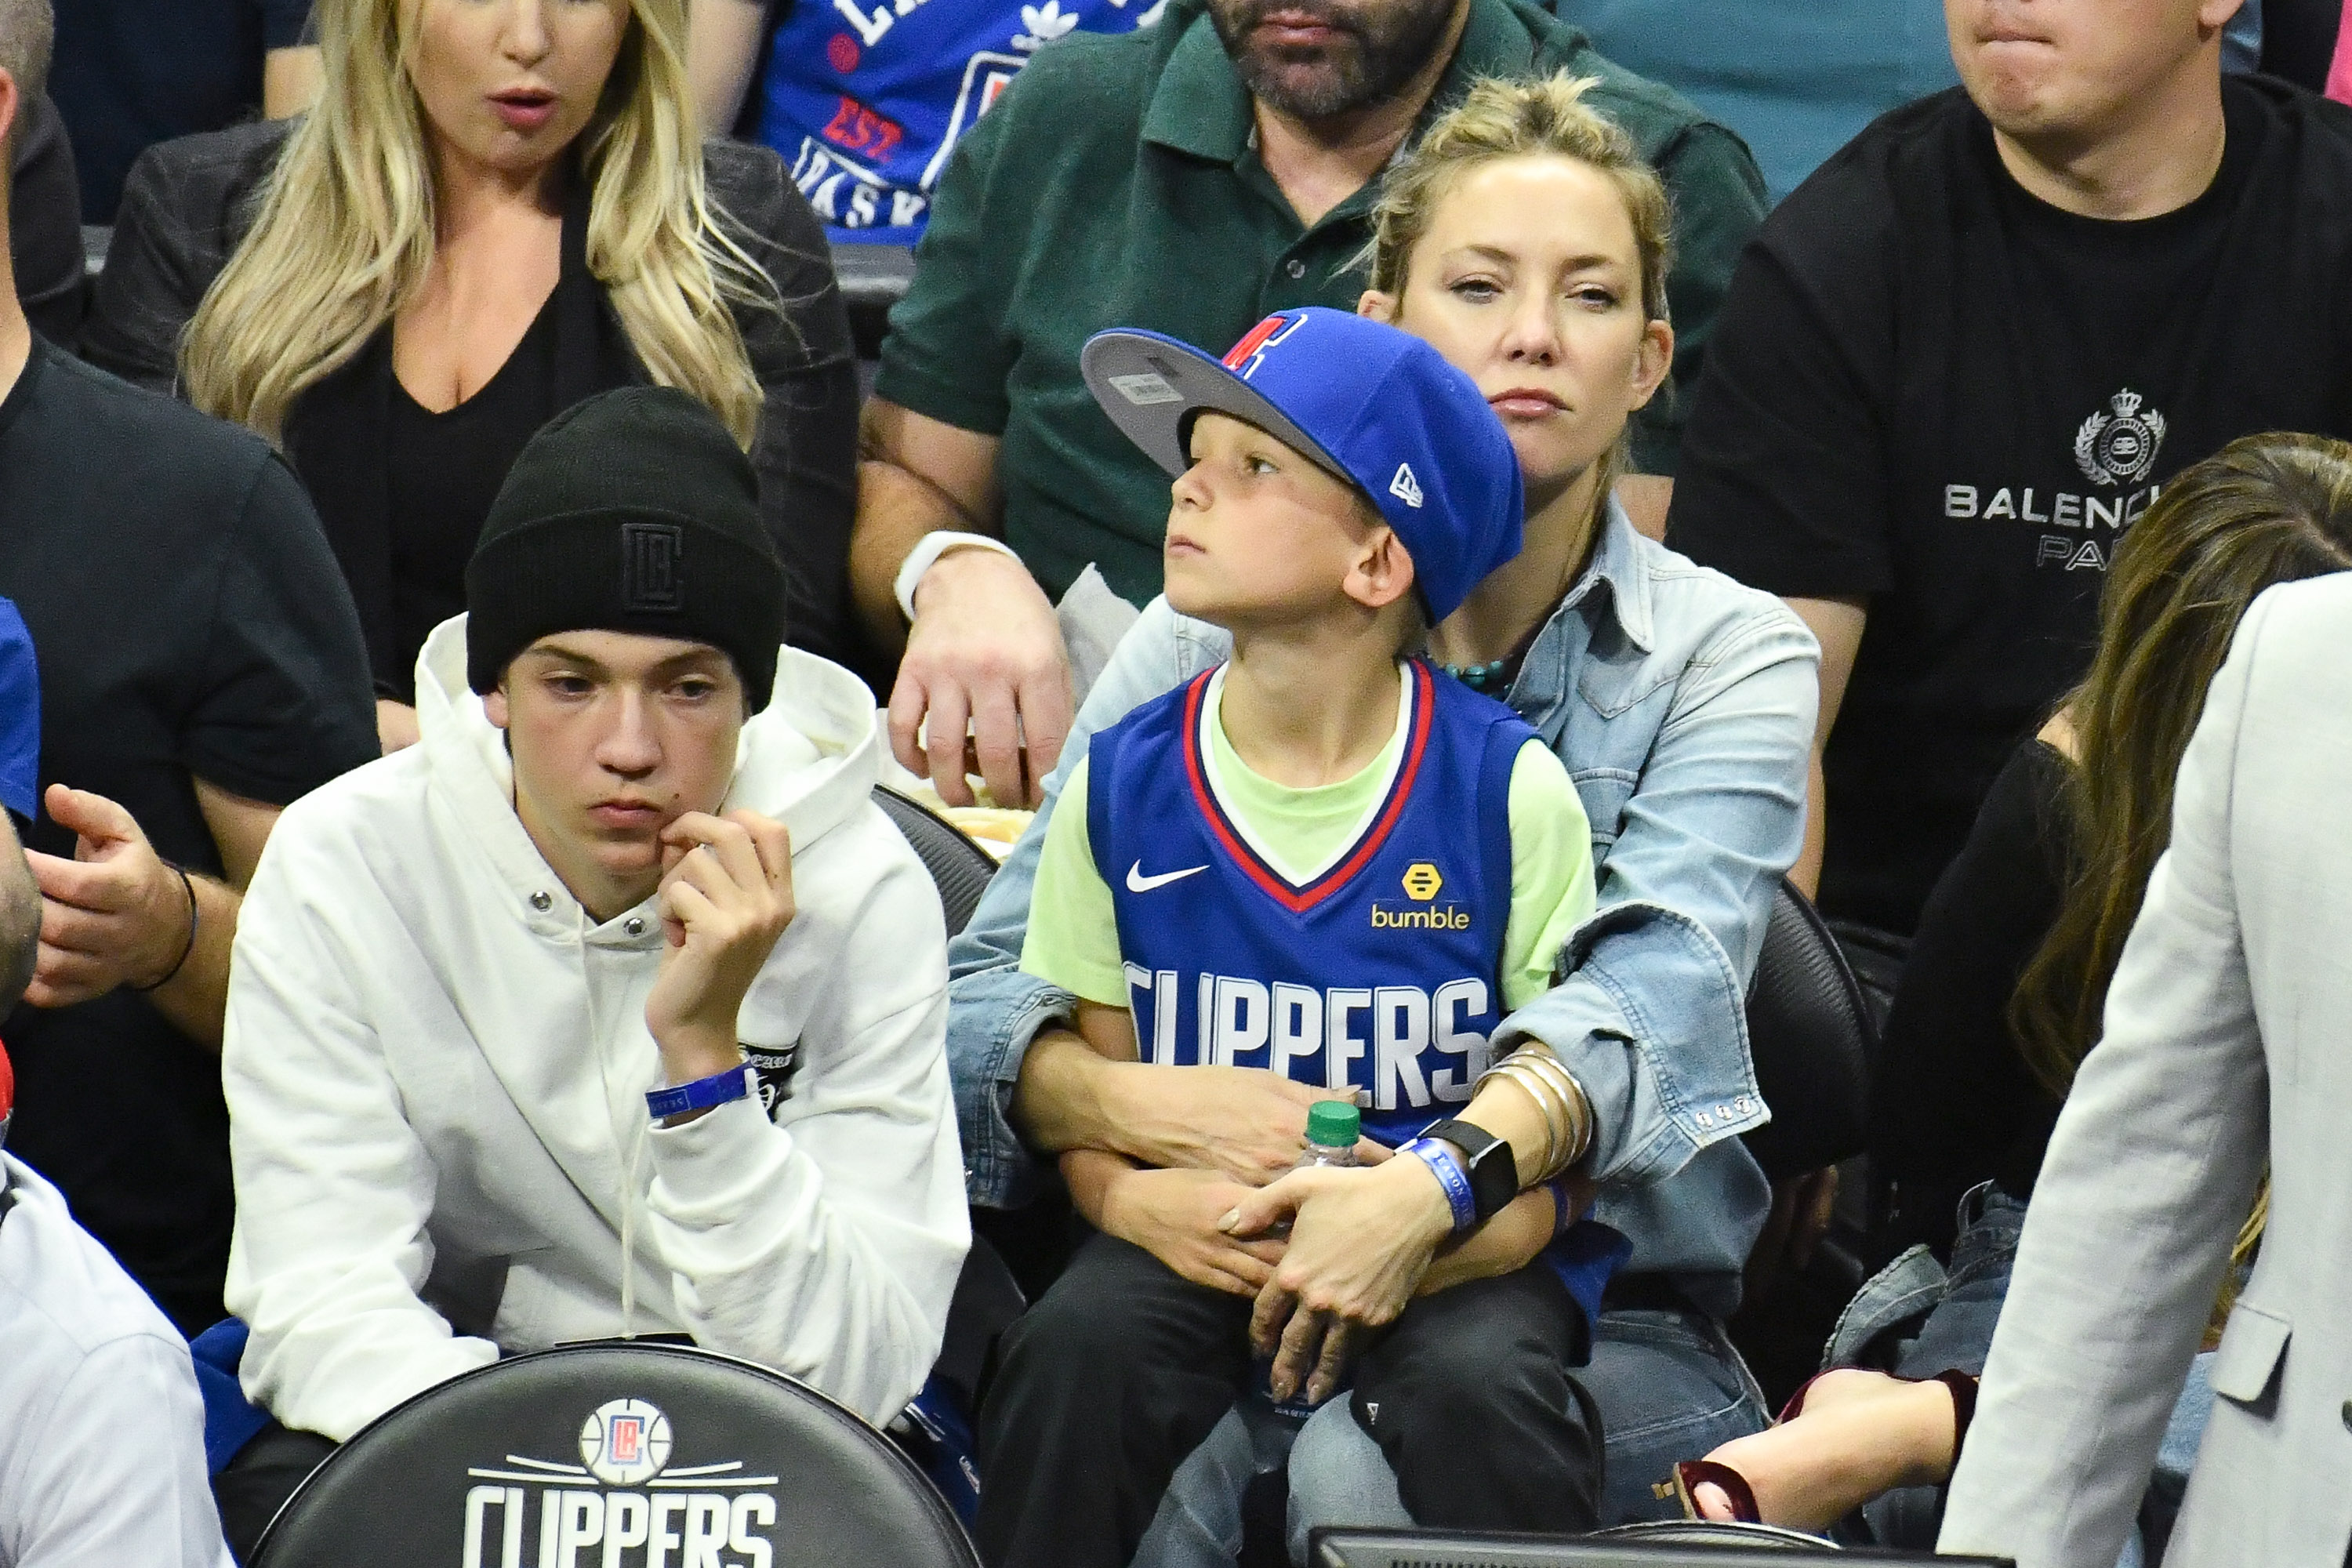 Ryder Robinson, Bingham Hawn Bellamy, and their mother, Kate Hudson at the Staples Center on October 22, 2019. | Source: Getty Images